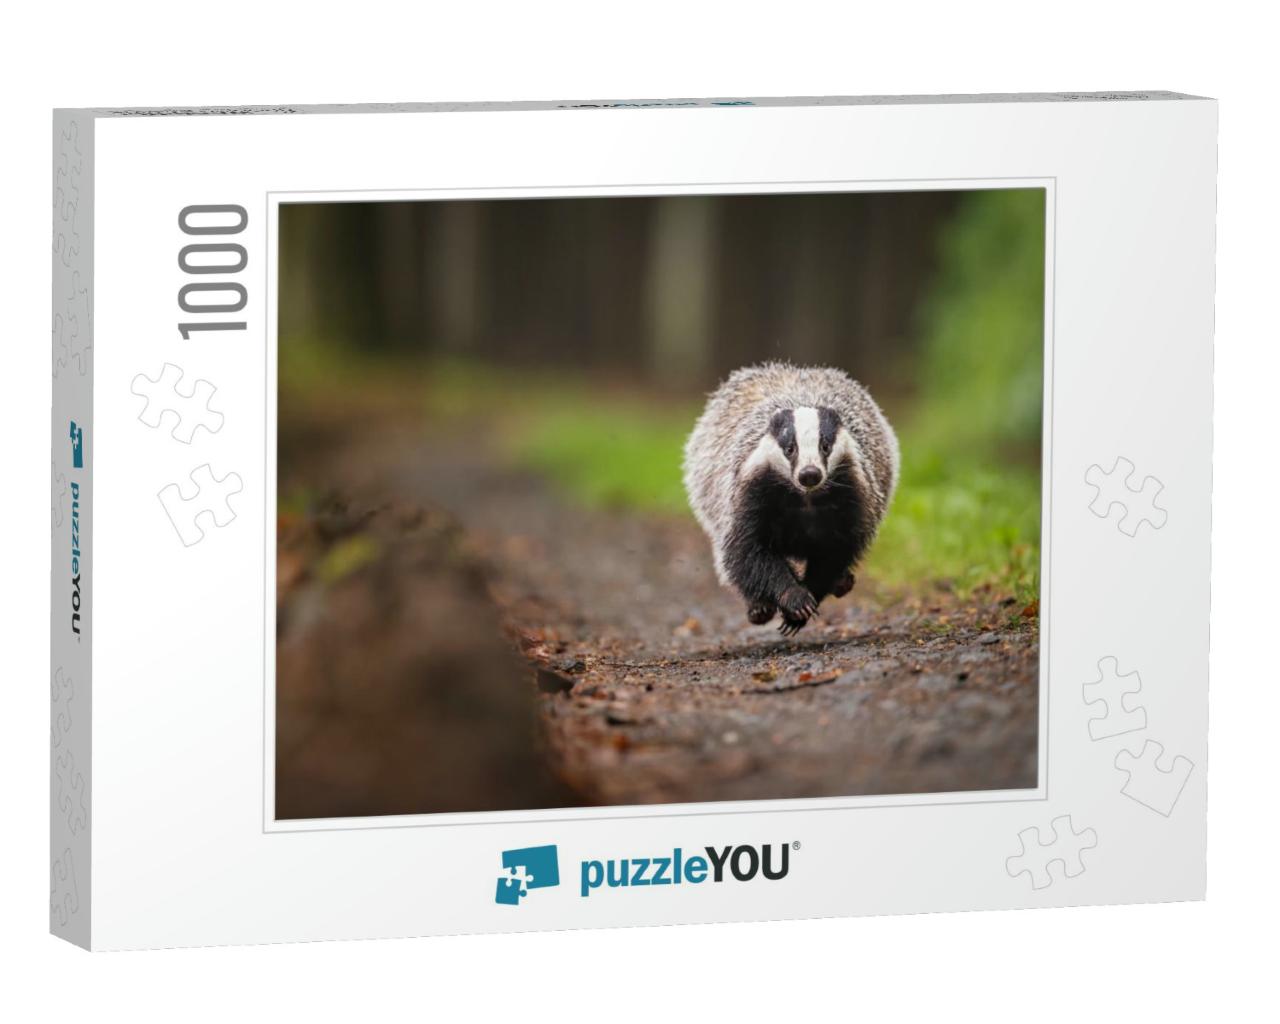 European Badger Running on a Forest Path. Wet & Gloomy Af... Jigsaw Puzzle with 1000 pieces